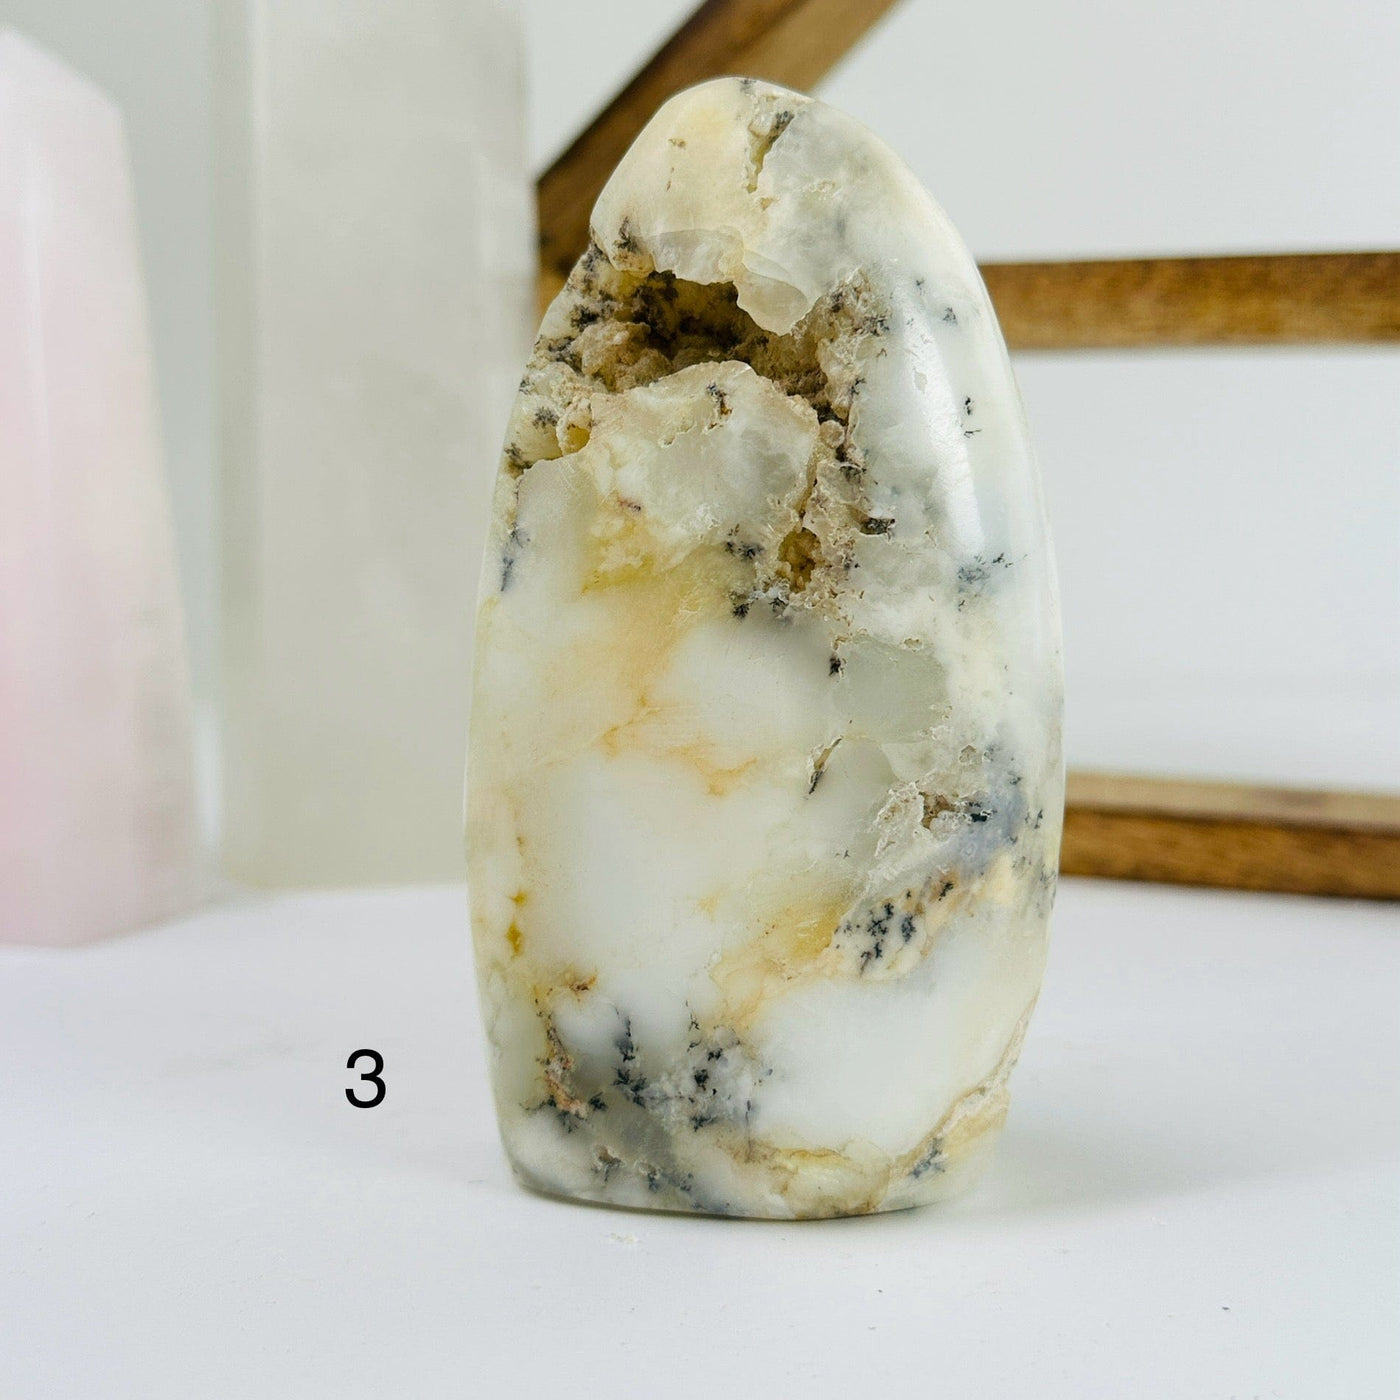 Dendrite opal cut base with decorations in the background